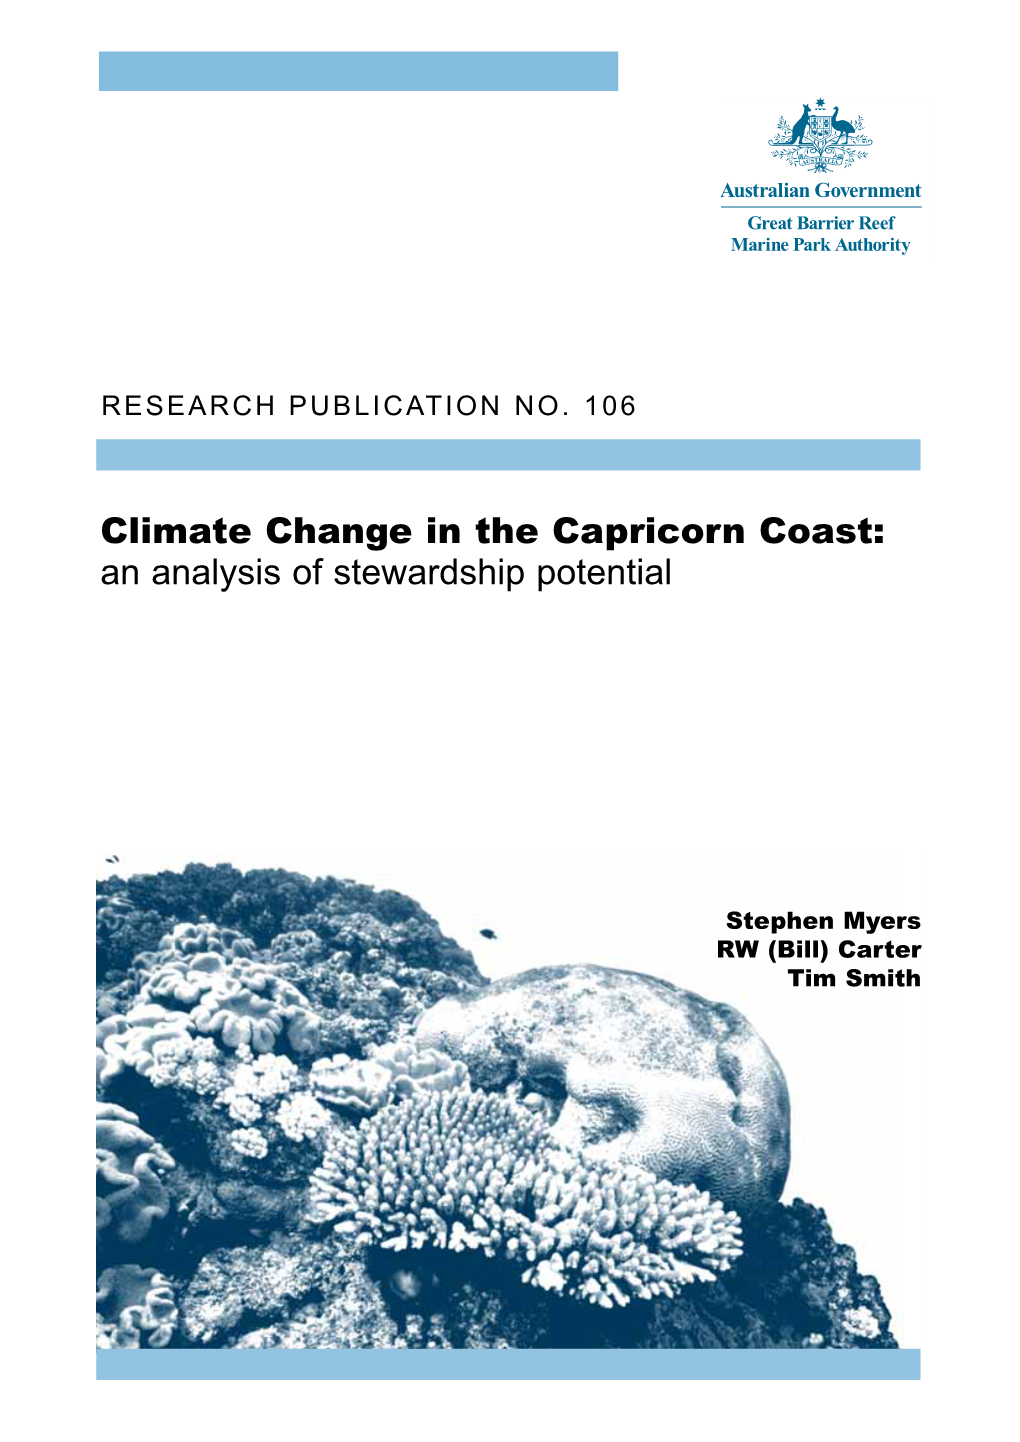 Climate Change in the Capricorn Coast: an Analysis of Stewardship Potential